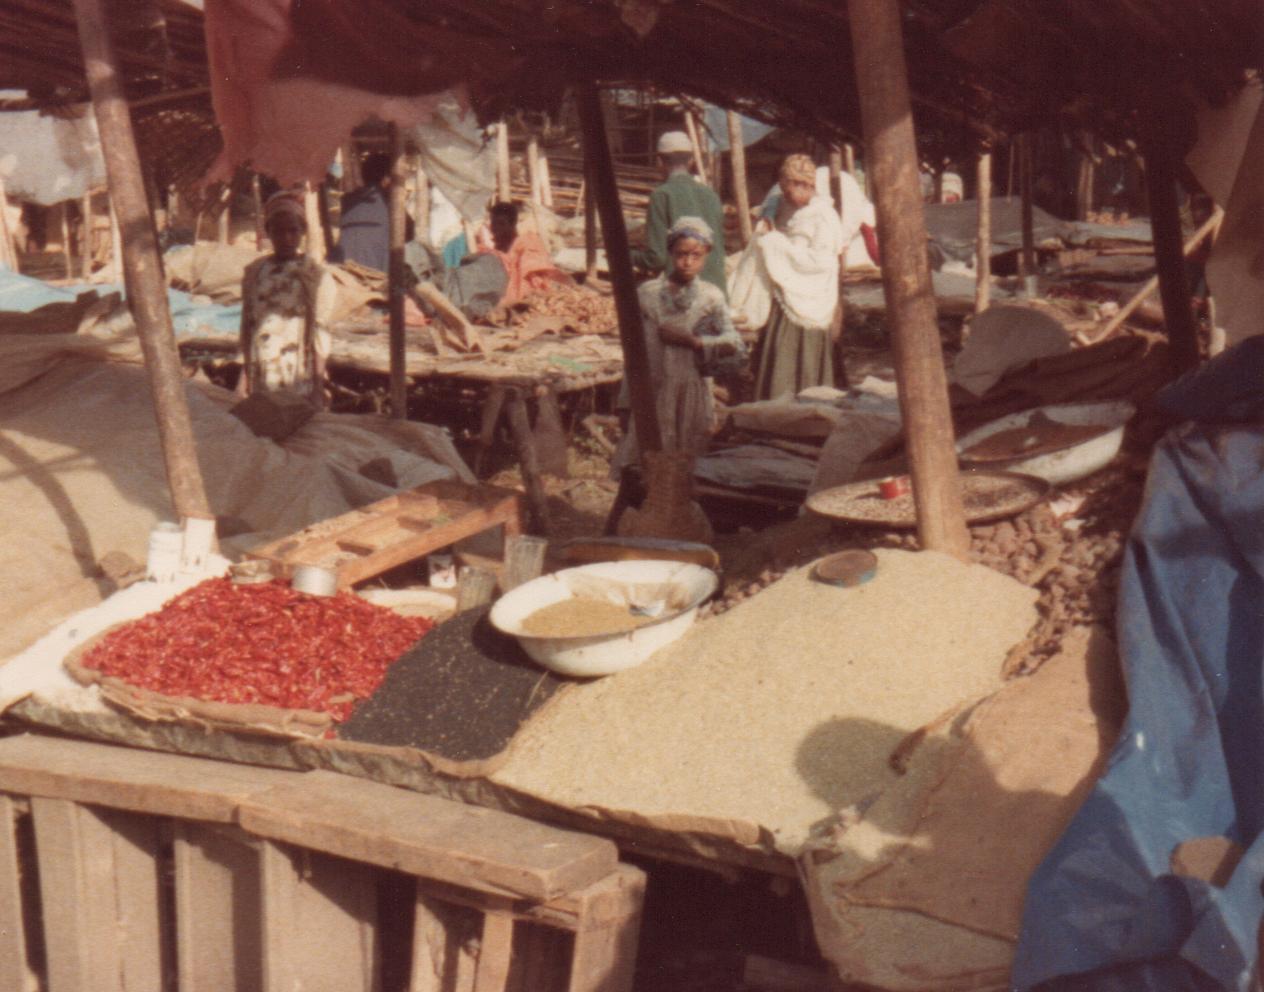 A spice stall in Addis Ababa market